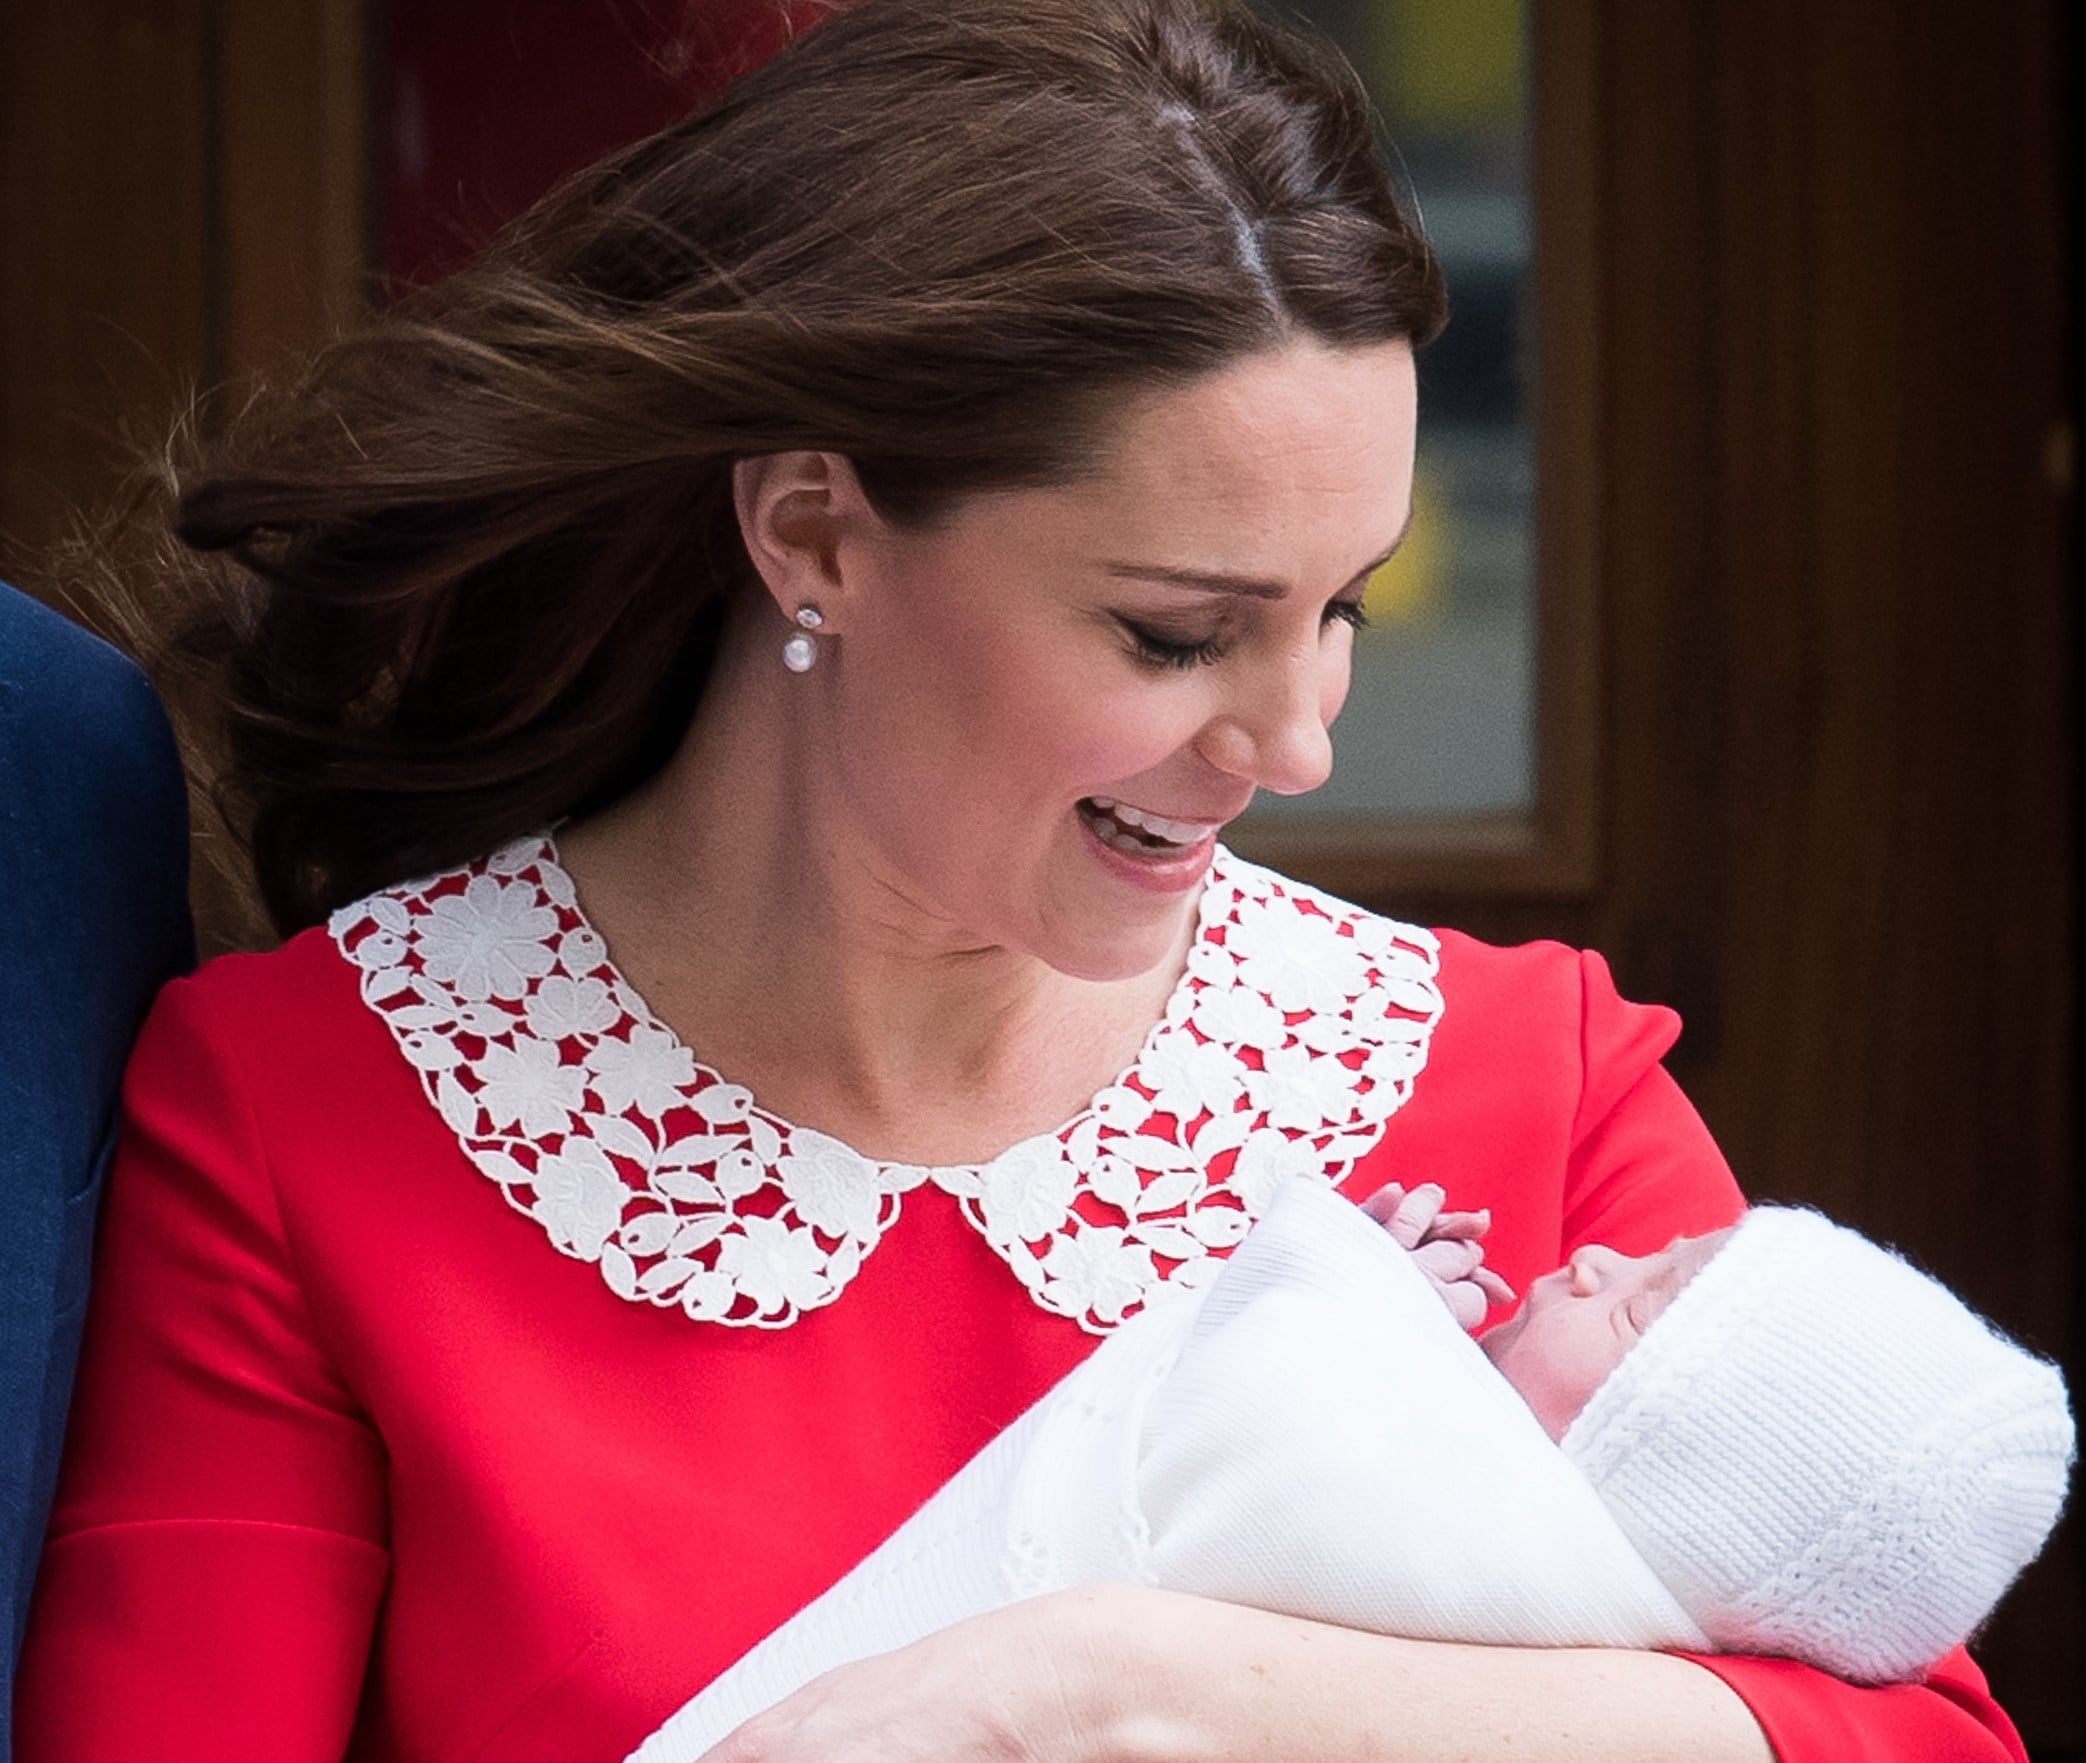 How to Pronounce Louis - How to Pronounce the Royal Baby's Name Louis